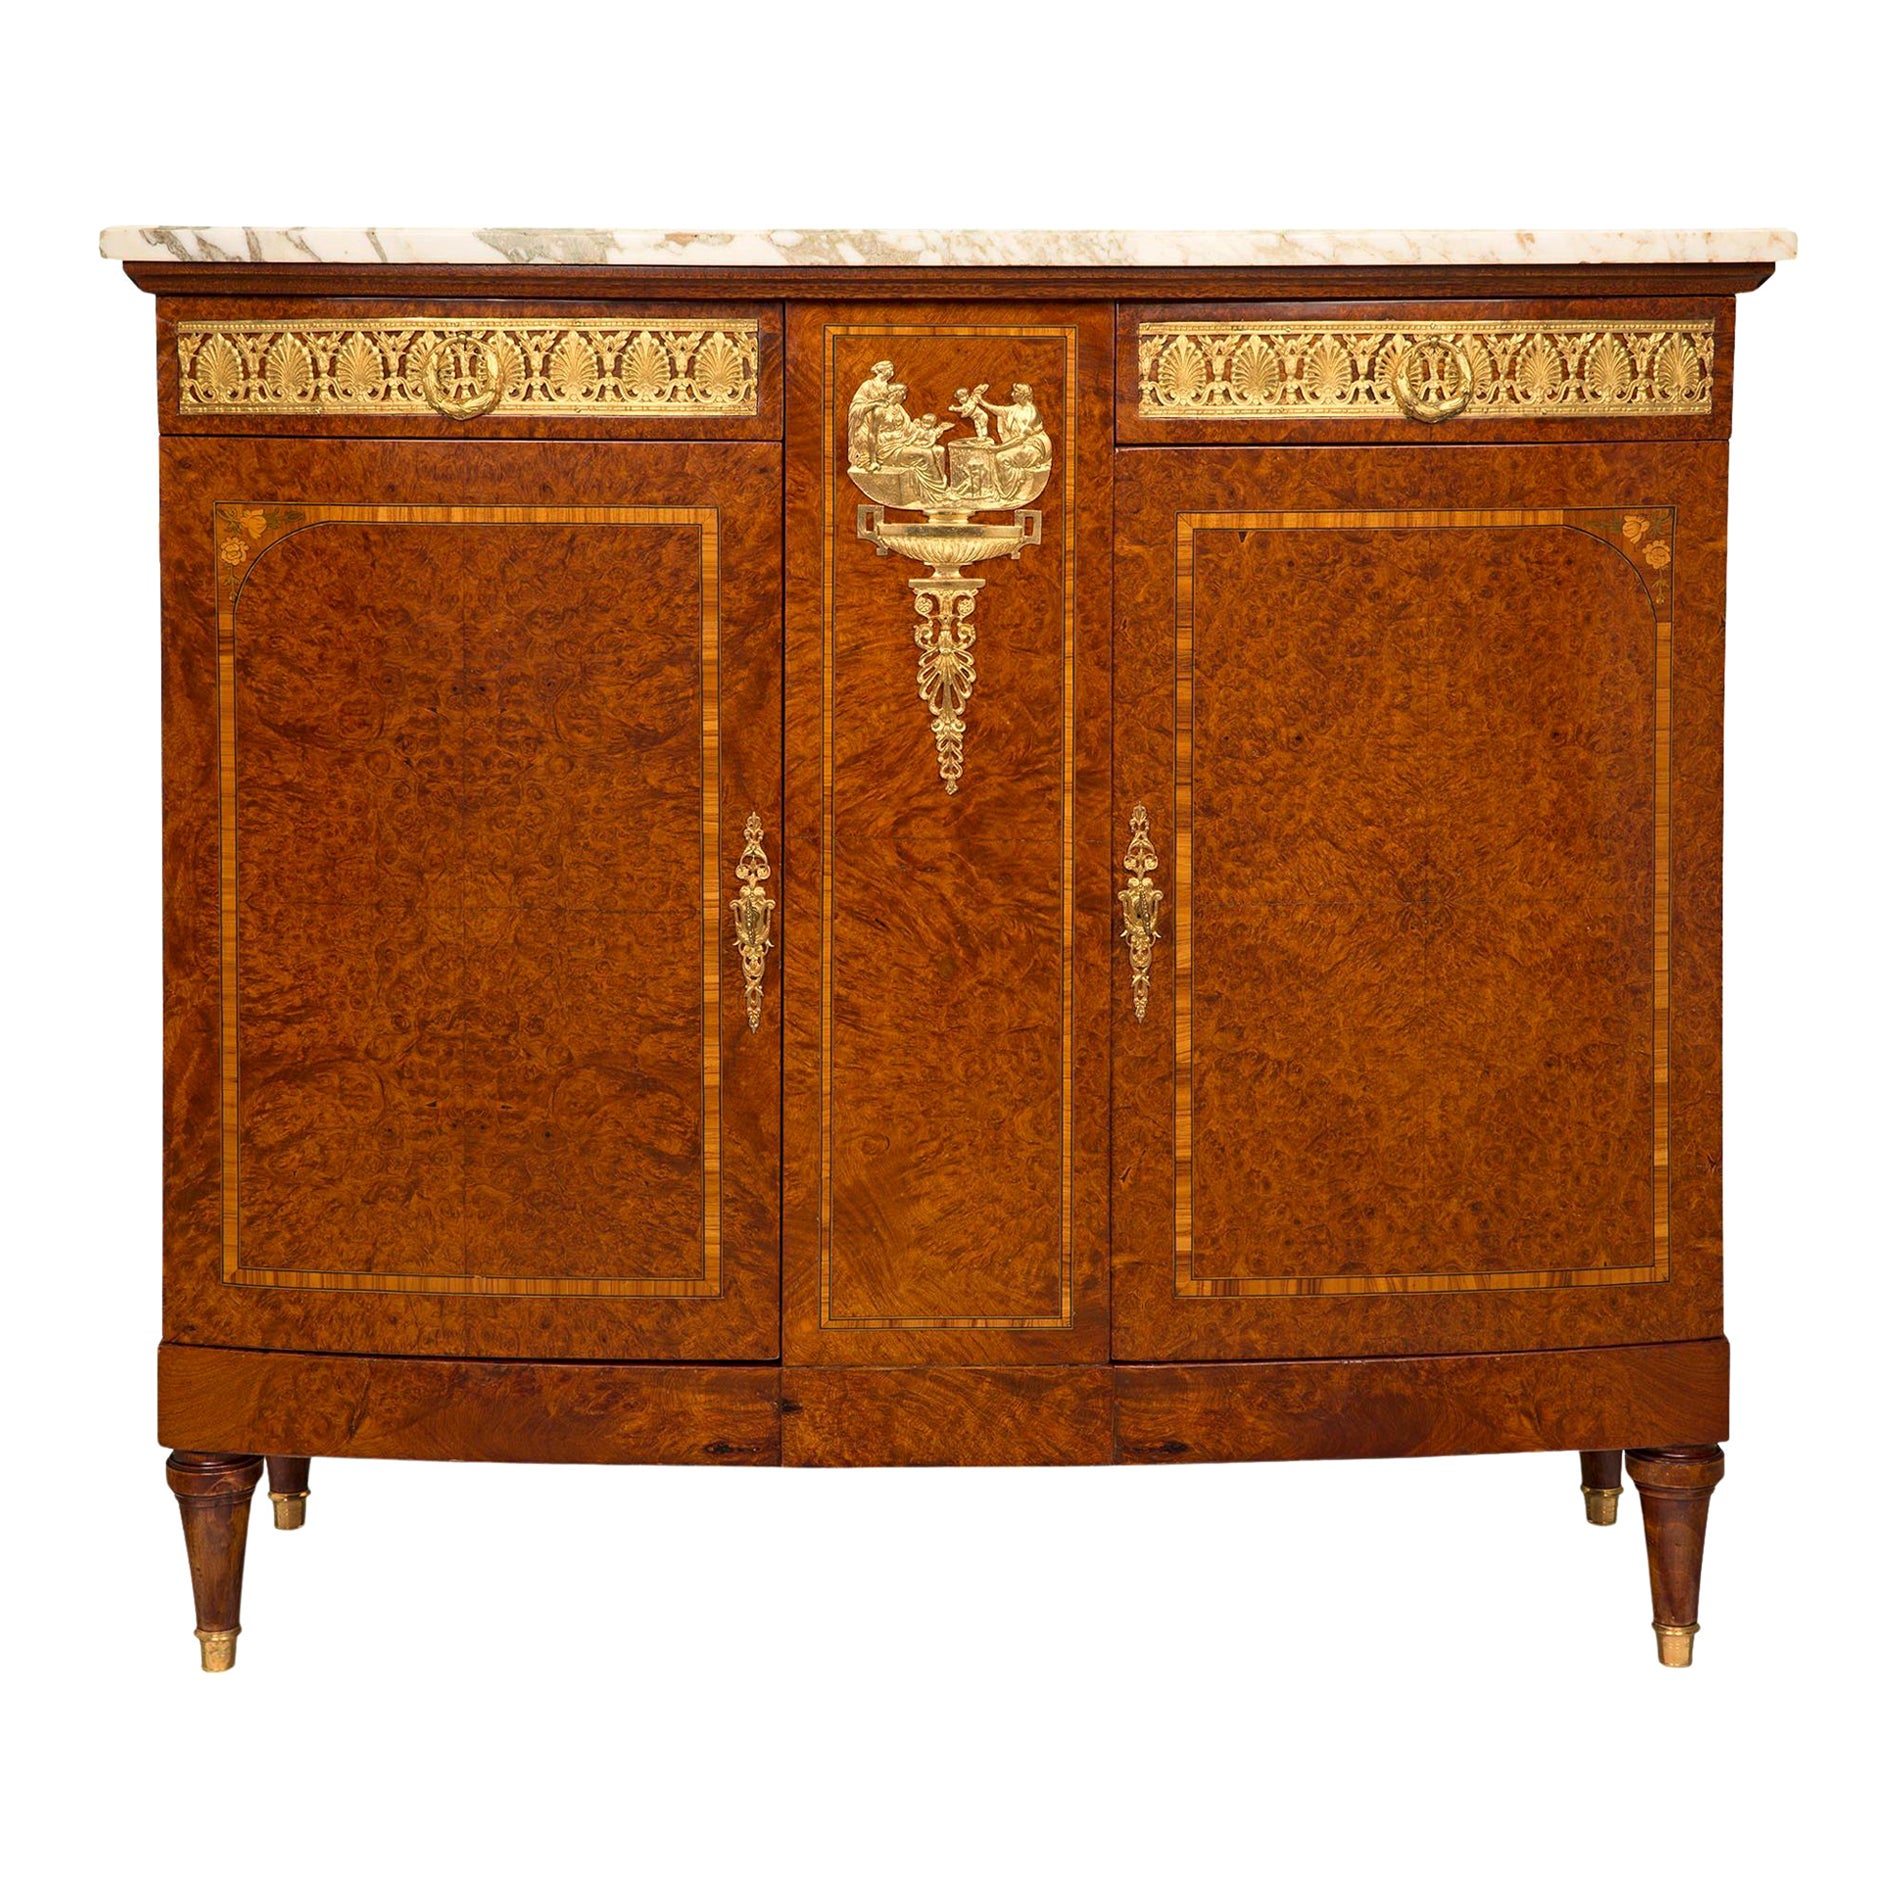 French 19th Century Neoclassical Style Burl Walnut, Tulipwood and Ormolu Buffet For Sale